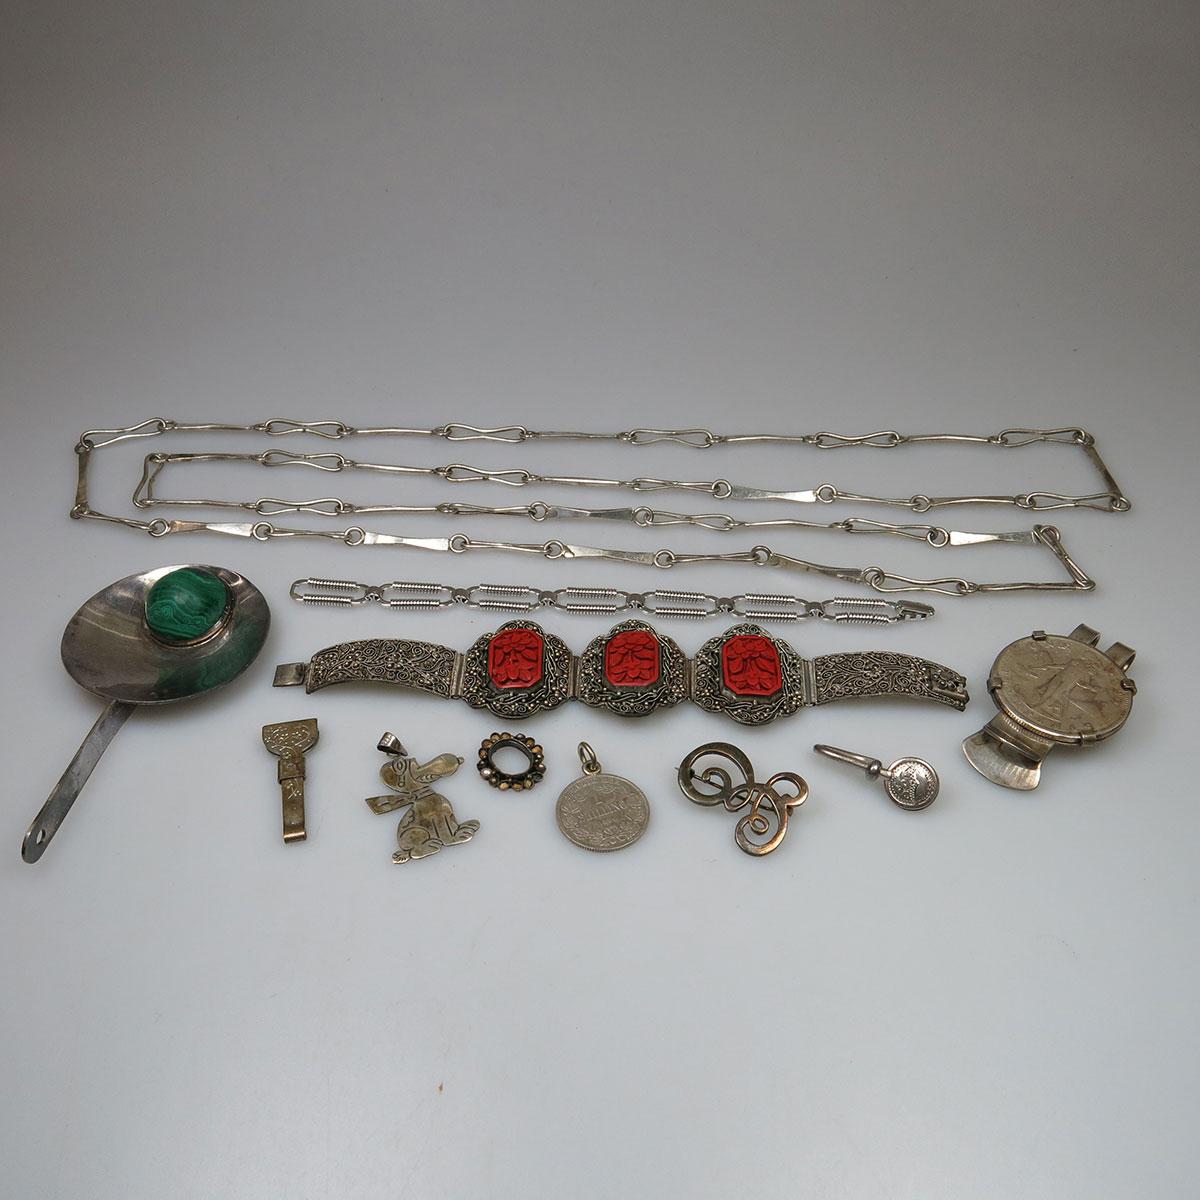 Small Quantity Of Silver And Silver-Plated Jewellery, Etc